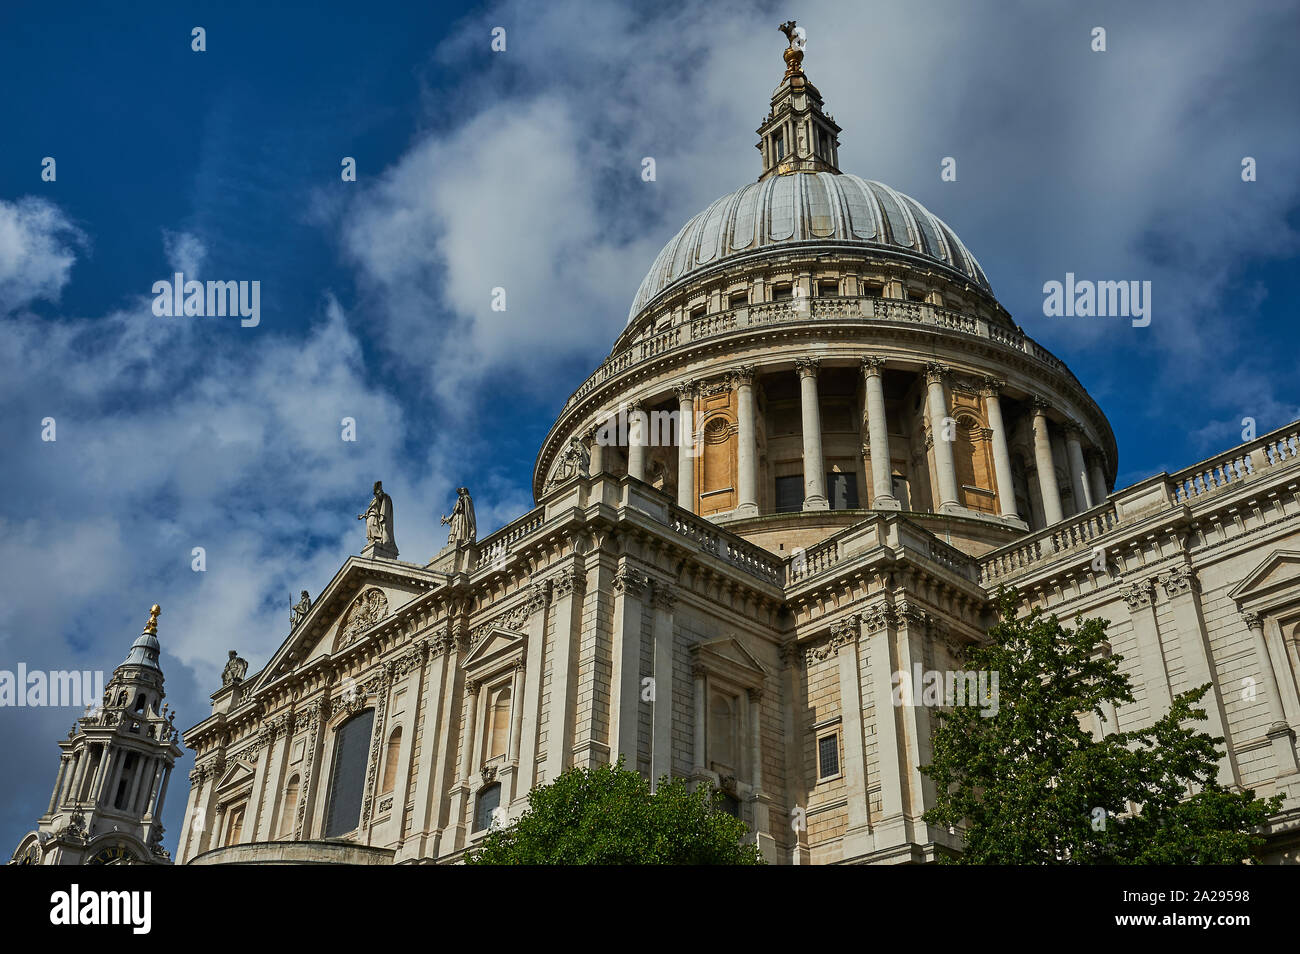 St Paul's Cathedral, London- designed by Sir Christopher Wren and an iconic London landmark. Stock Photo